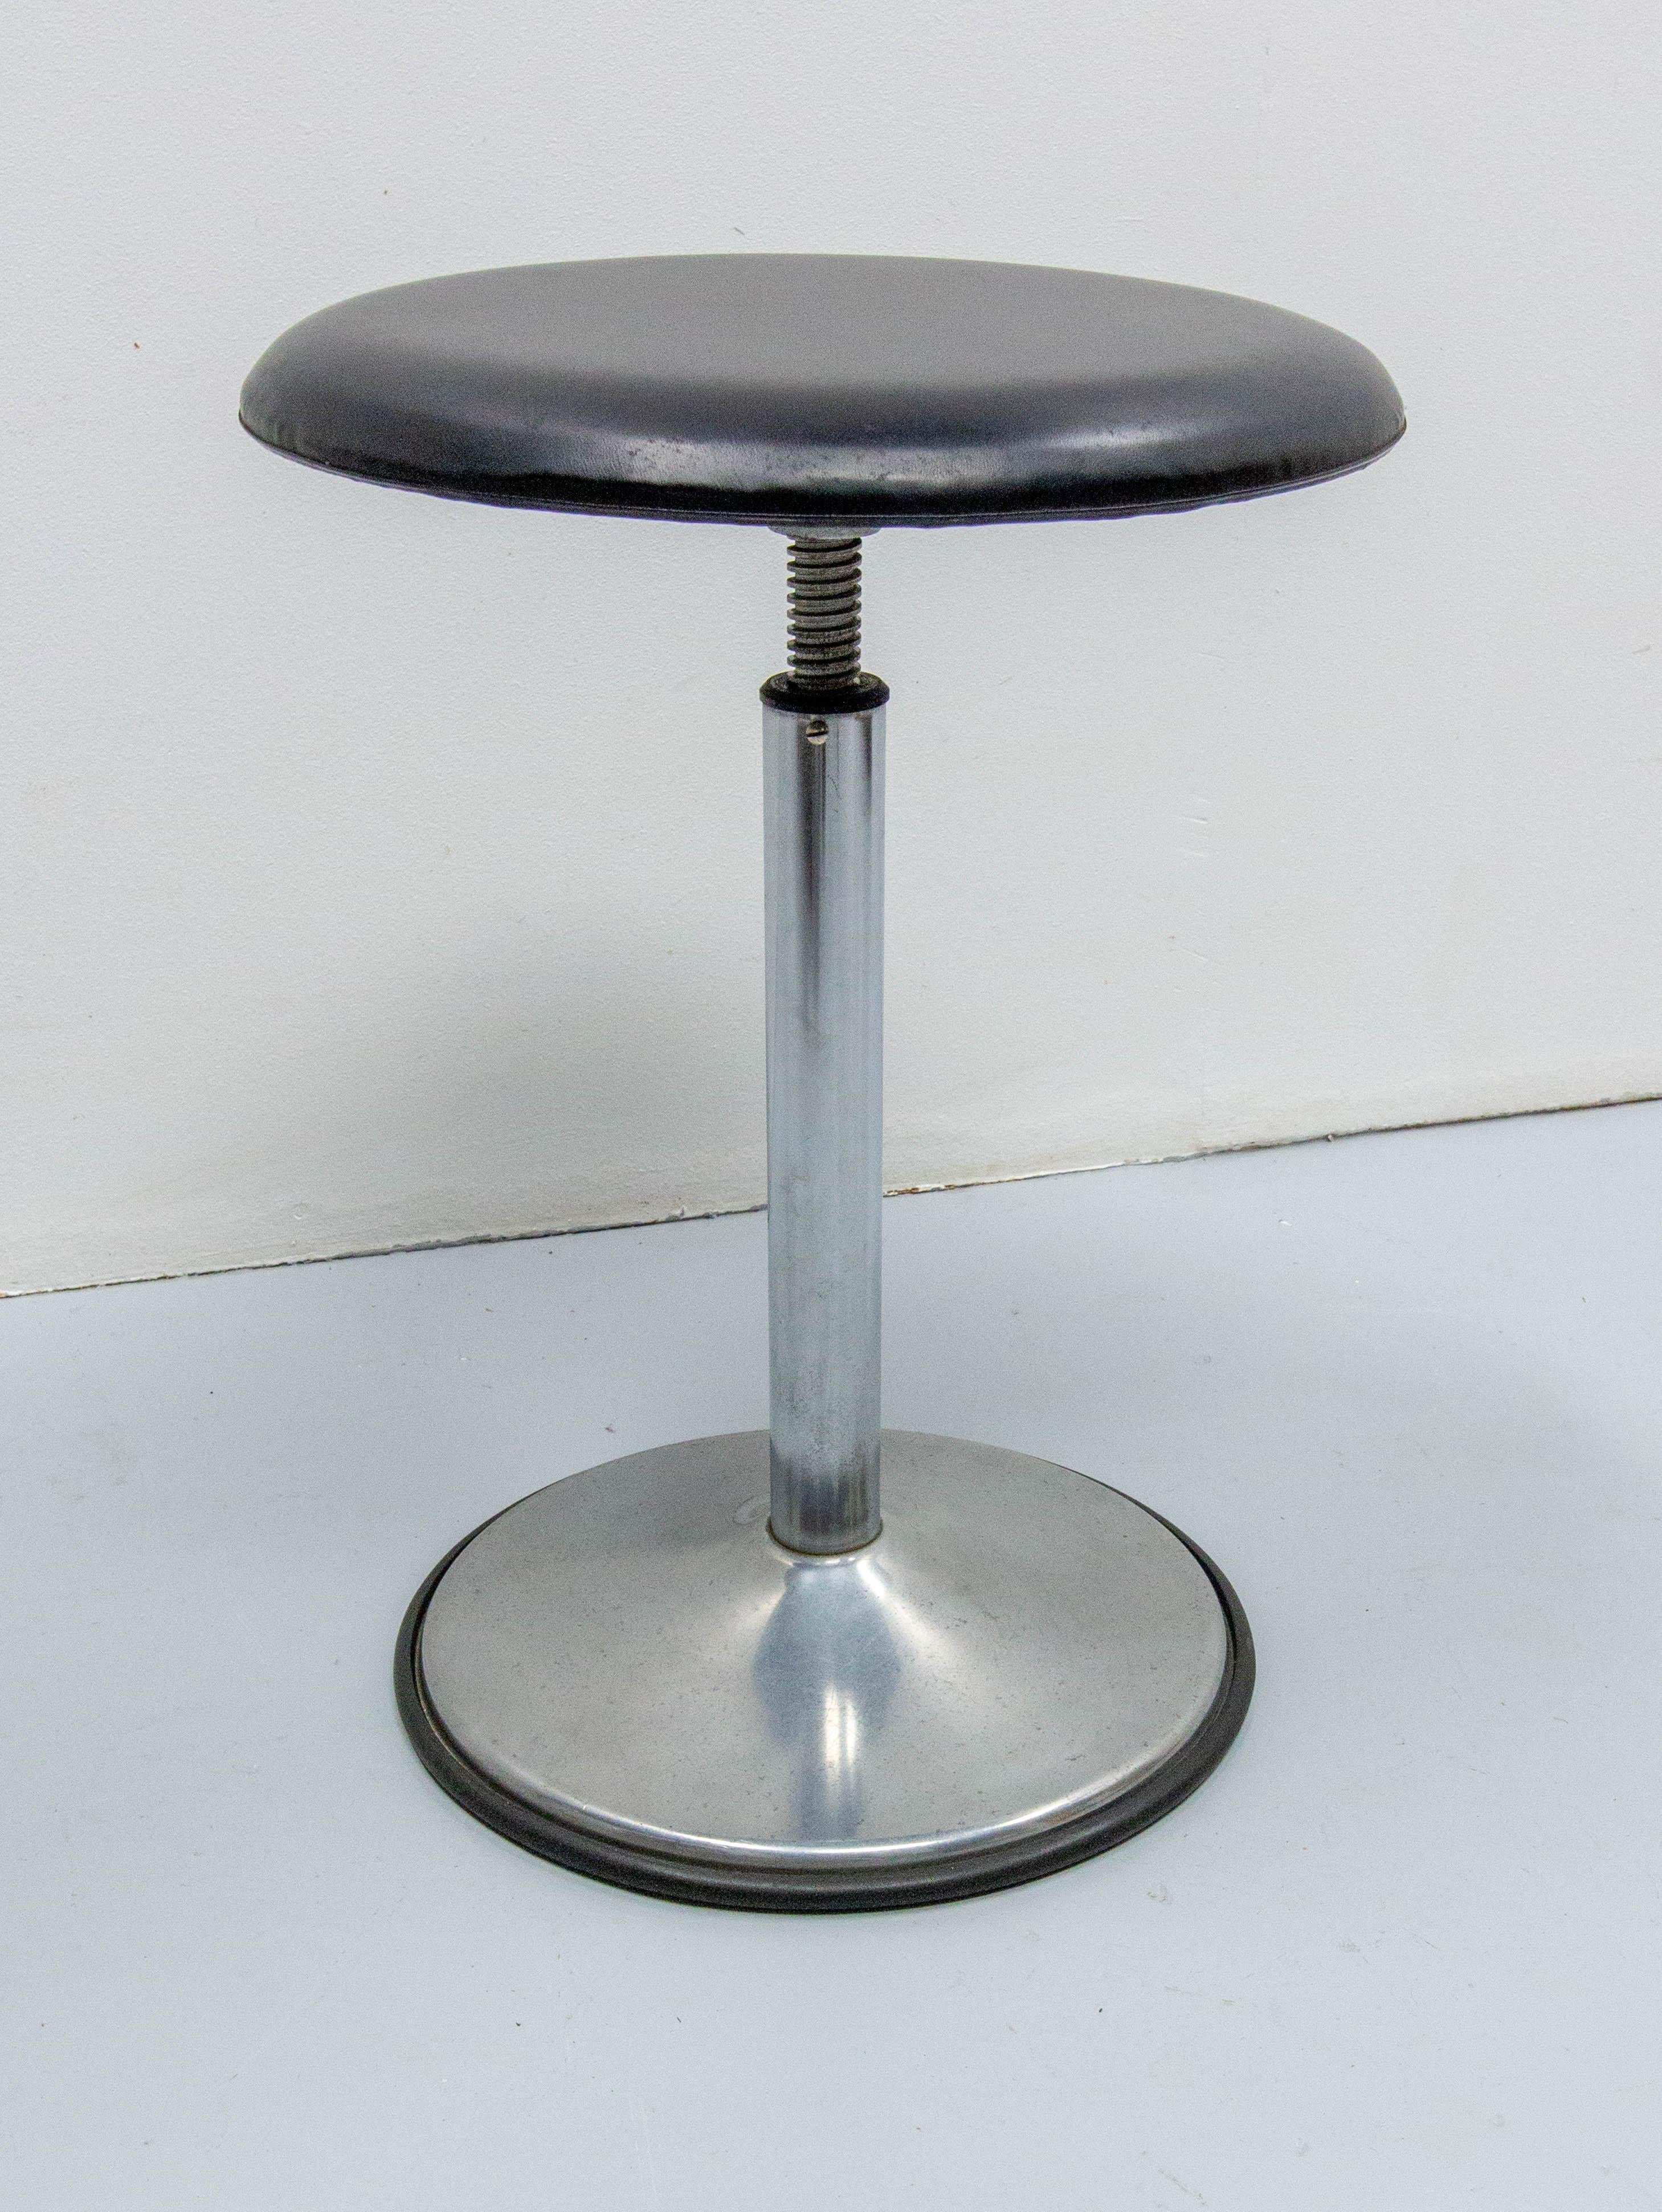 French  stool made circa 1950.

Thanks to a very careful previous owner the stool is in very good condition (especially the skai seat and the rubber)
The height can be adjusted with the central screw from  to 16.53 to 24.80 in. (42 to 63 cm)
Good